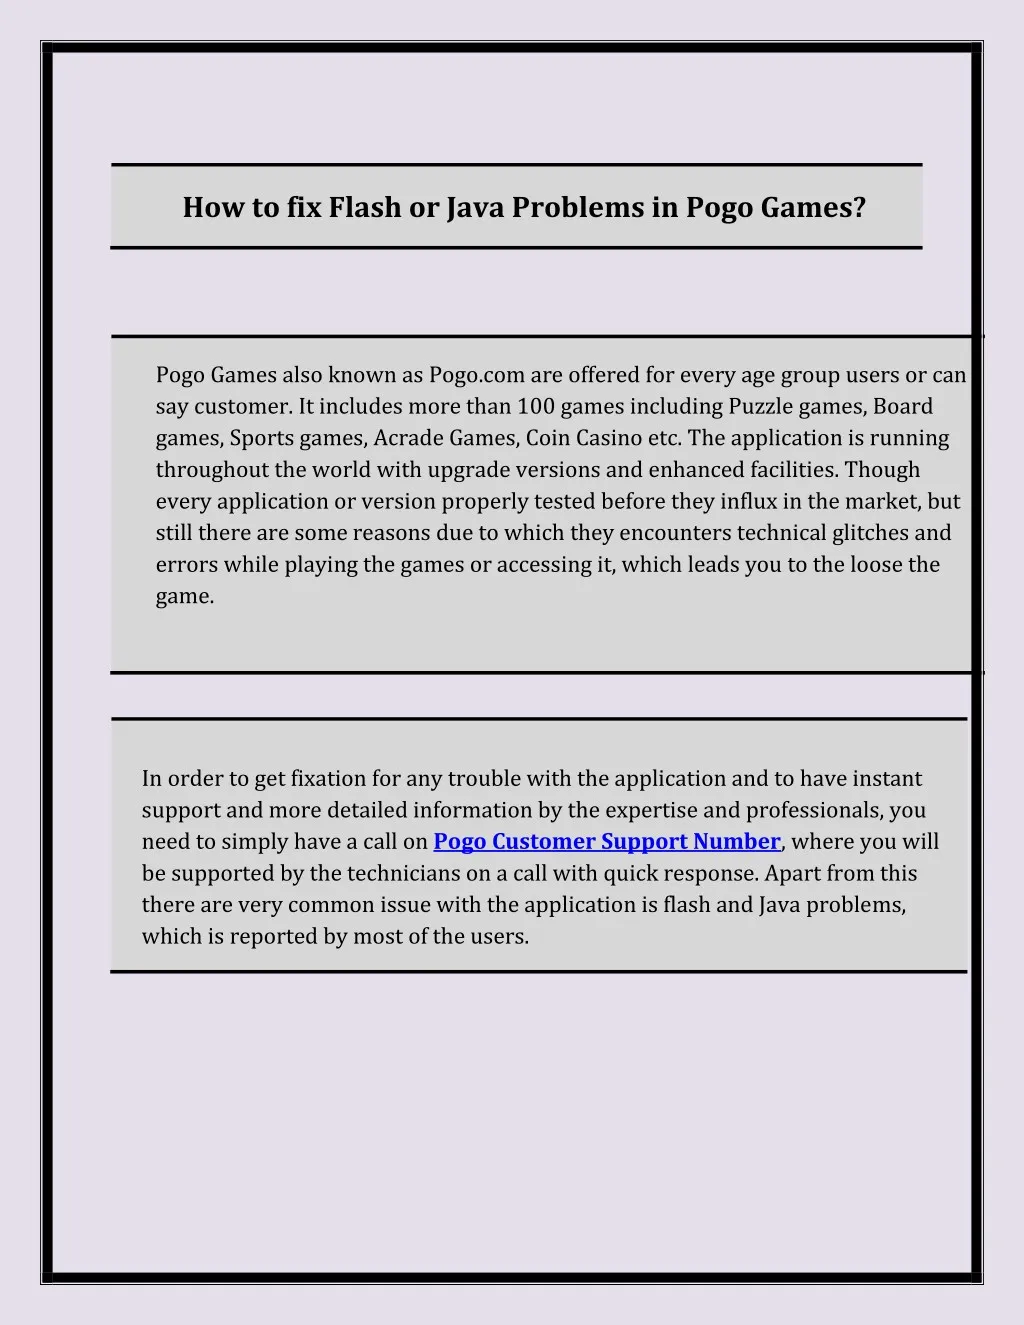 how to fix flash or java problems in pogo games